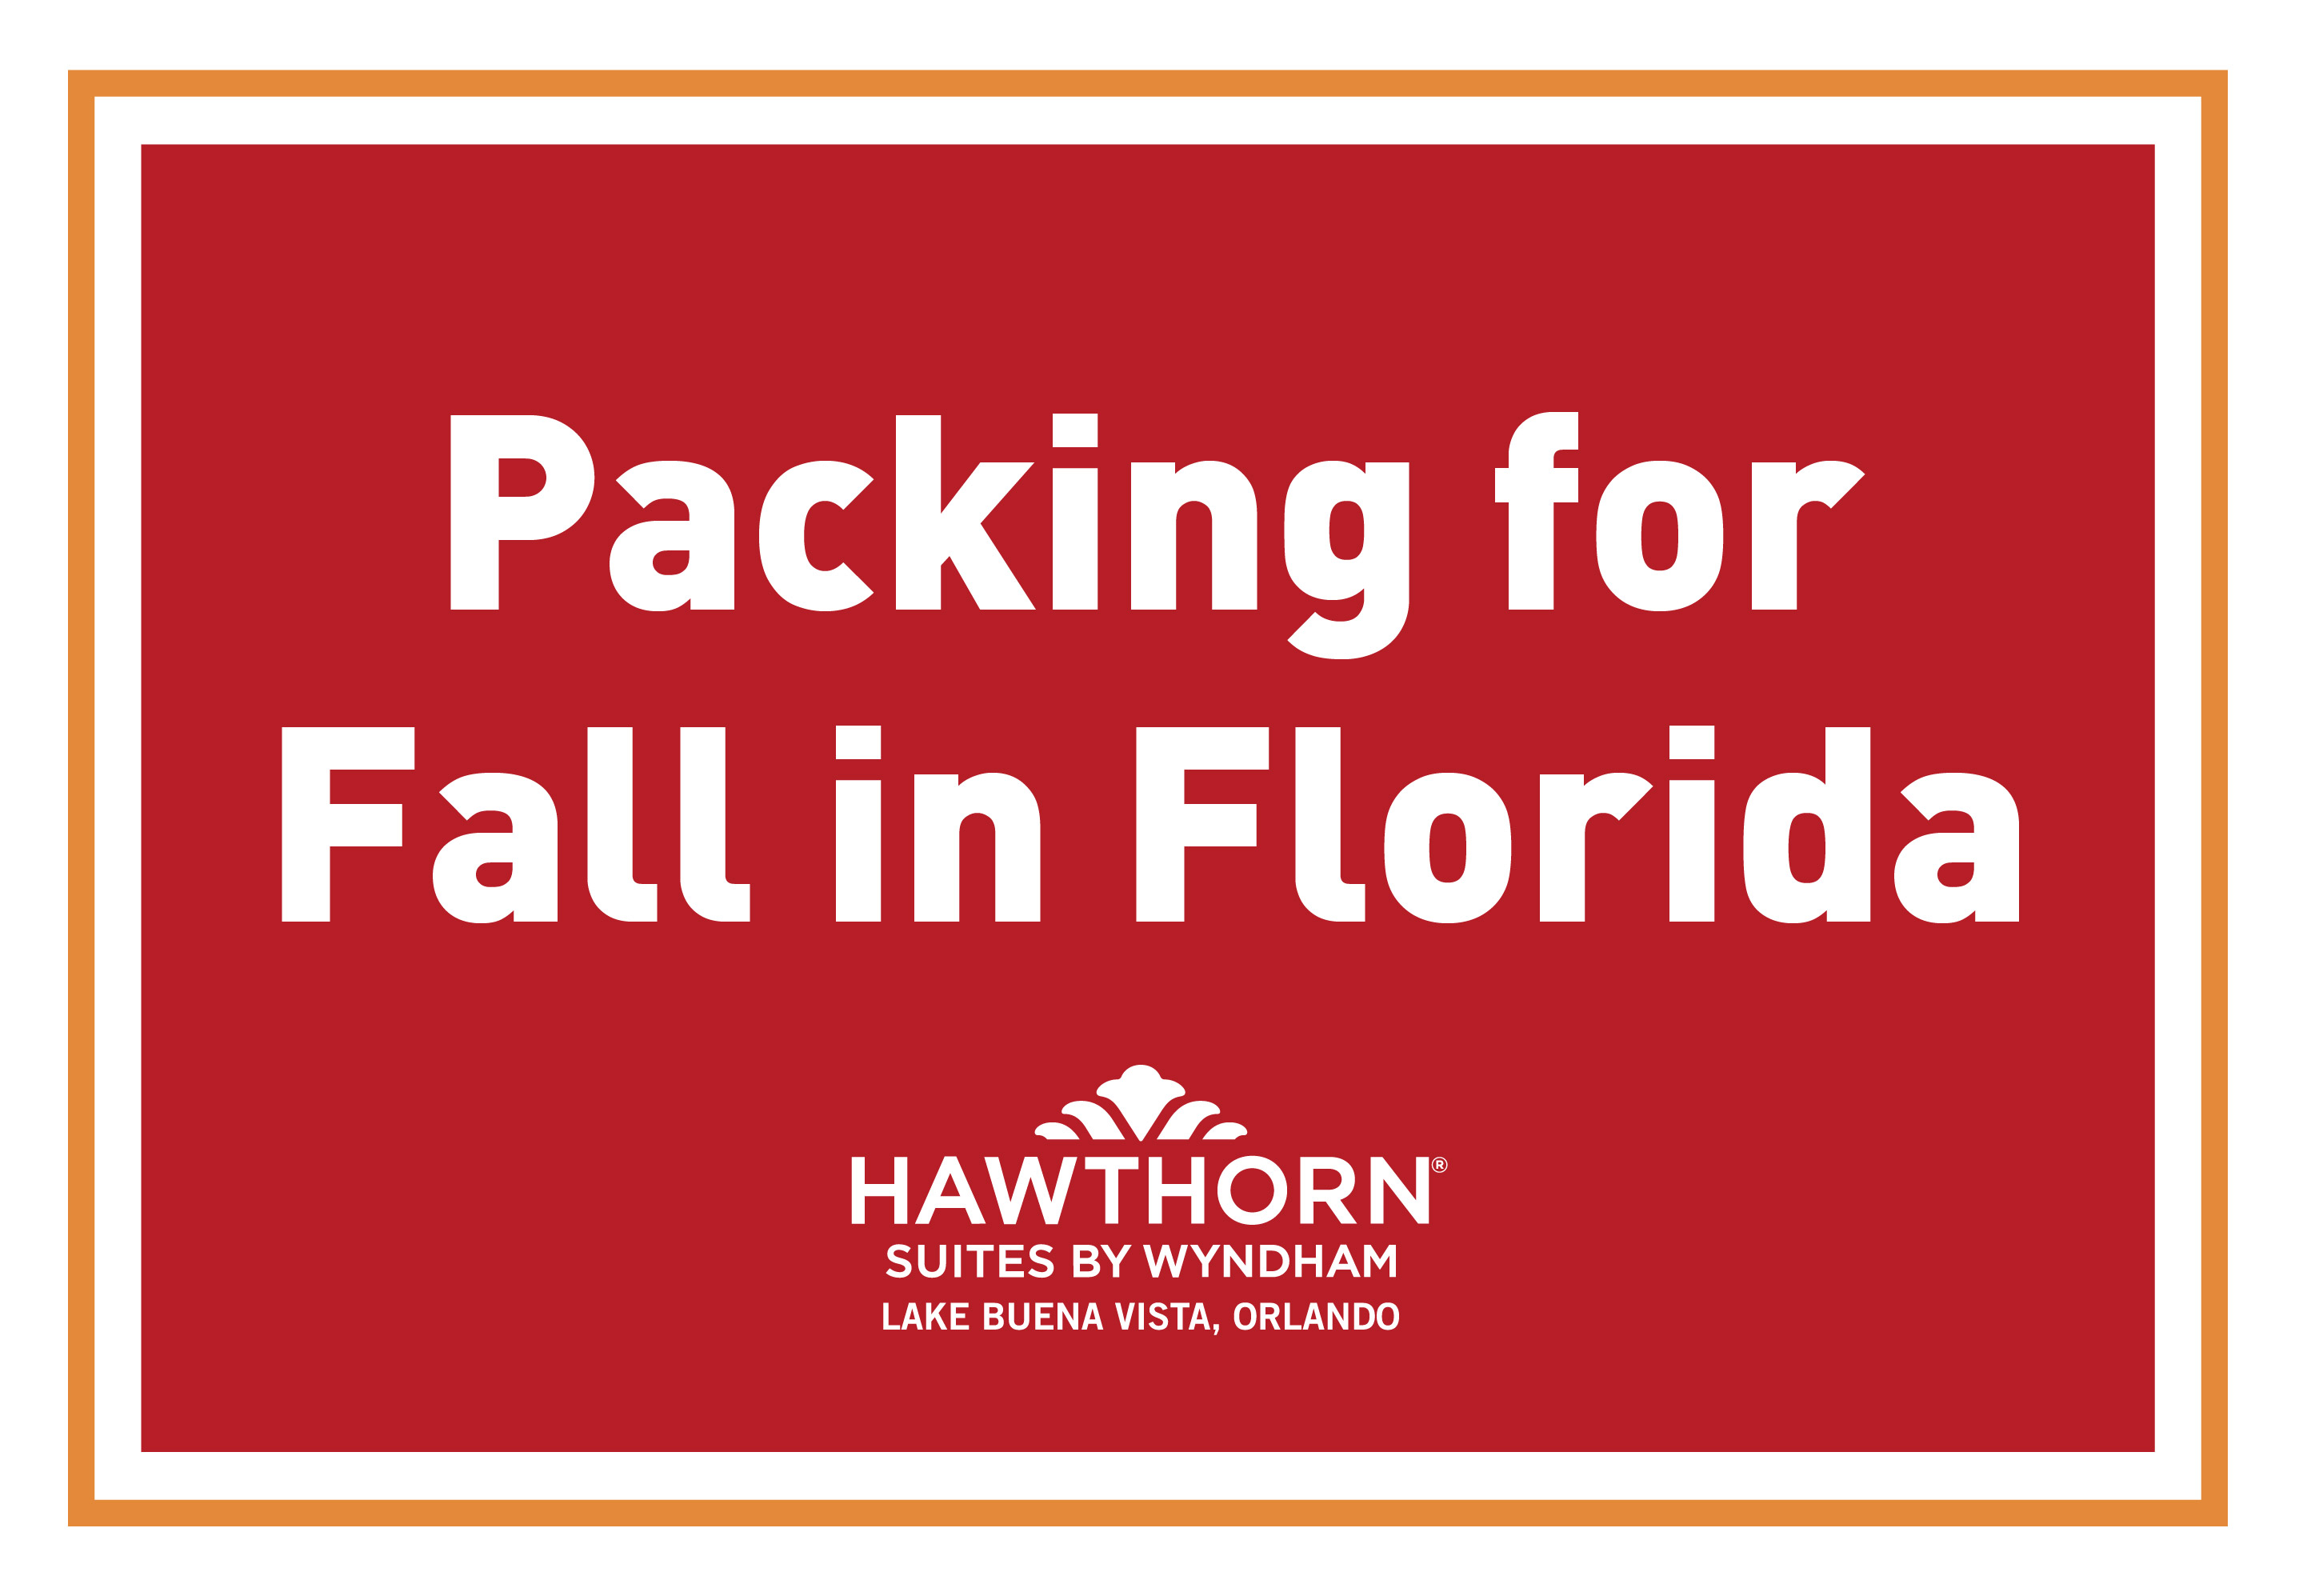 Packing for Fall in Florida - Hawthorn Suites By Wyndham Lake Buena Vista, Orlando